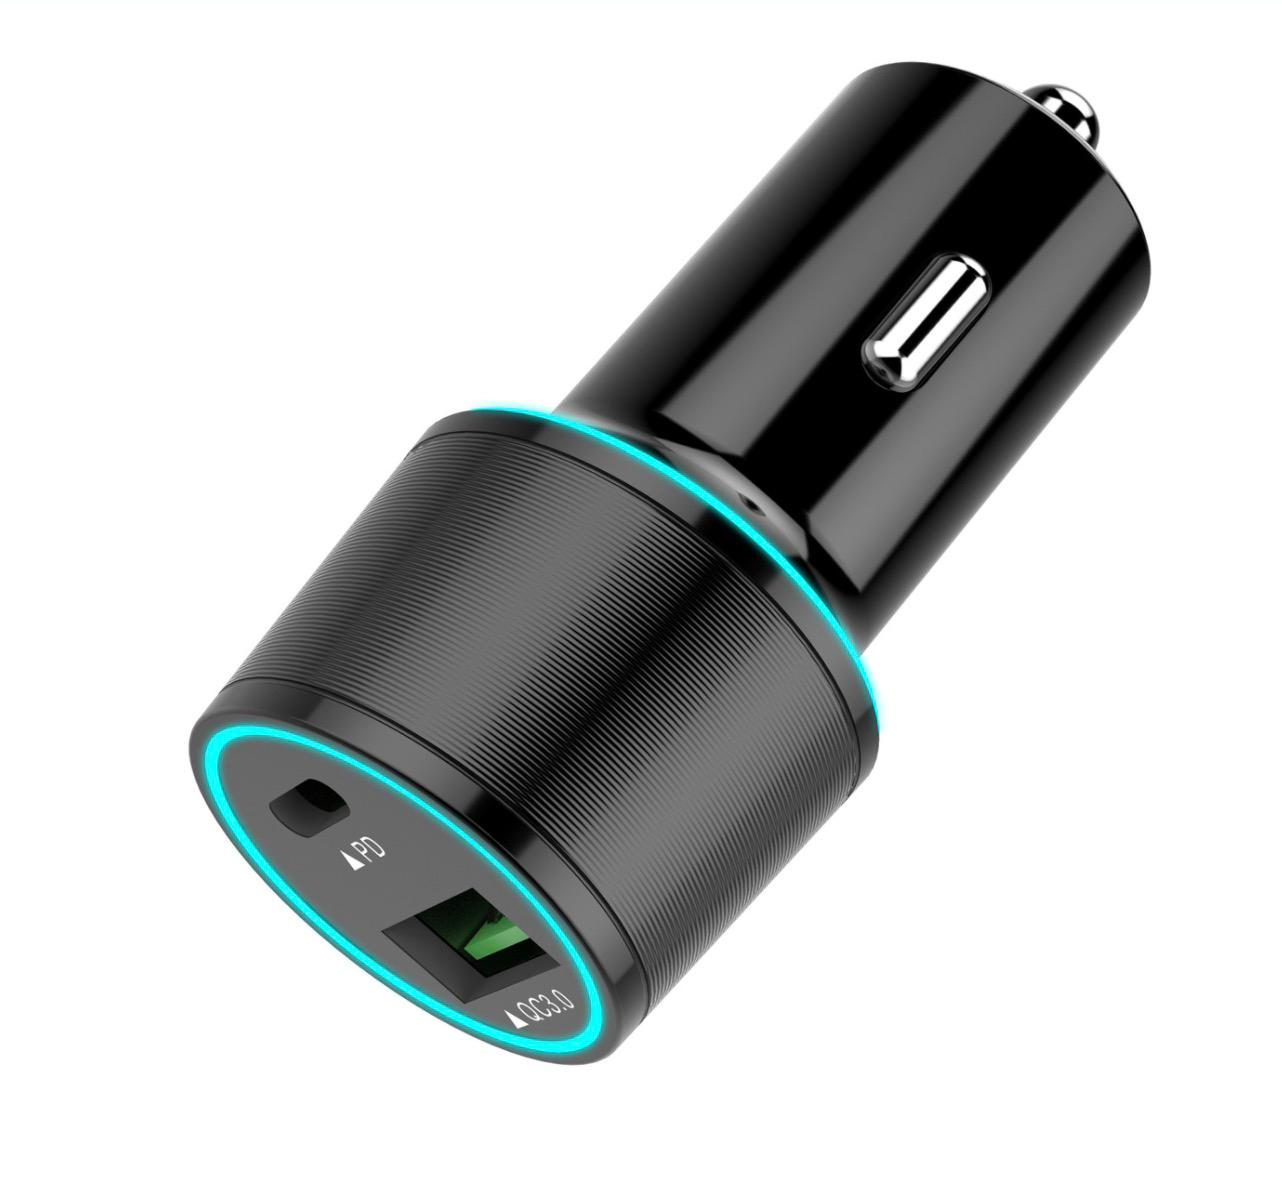 USB C Car Charger UrbanX 20W Car and Truck Charger For ZTE nubia Z17 miniS with Power Delivery 3.0 Cigarette Lighter USB Charger - Black, Comes with USB C to USB C PD Cable 3.3FT 1M - image 2 of 3